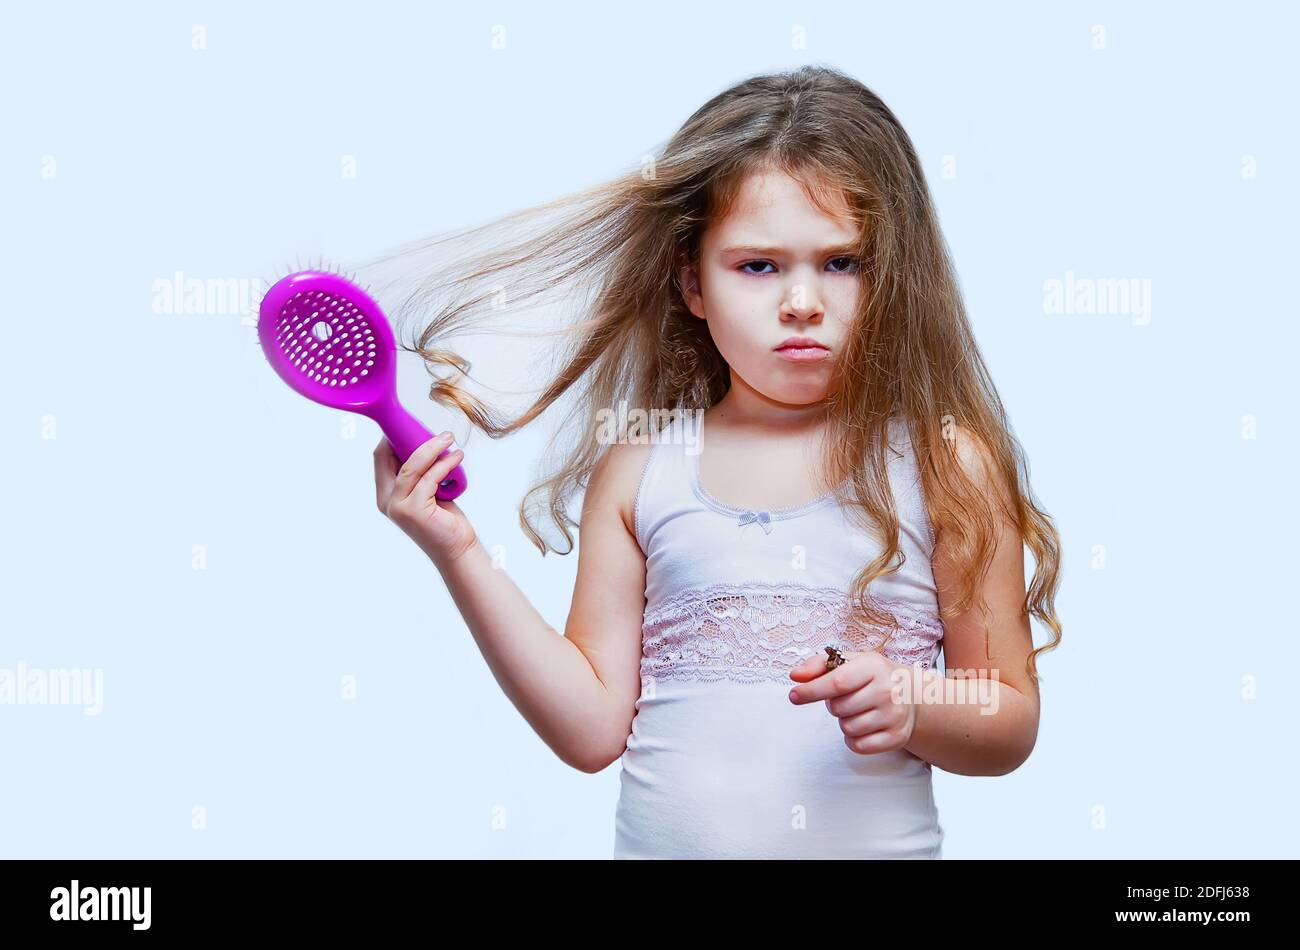 Hair care concept with portrait of girl brushing her unruly, tangled long hair Stock Photo